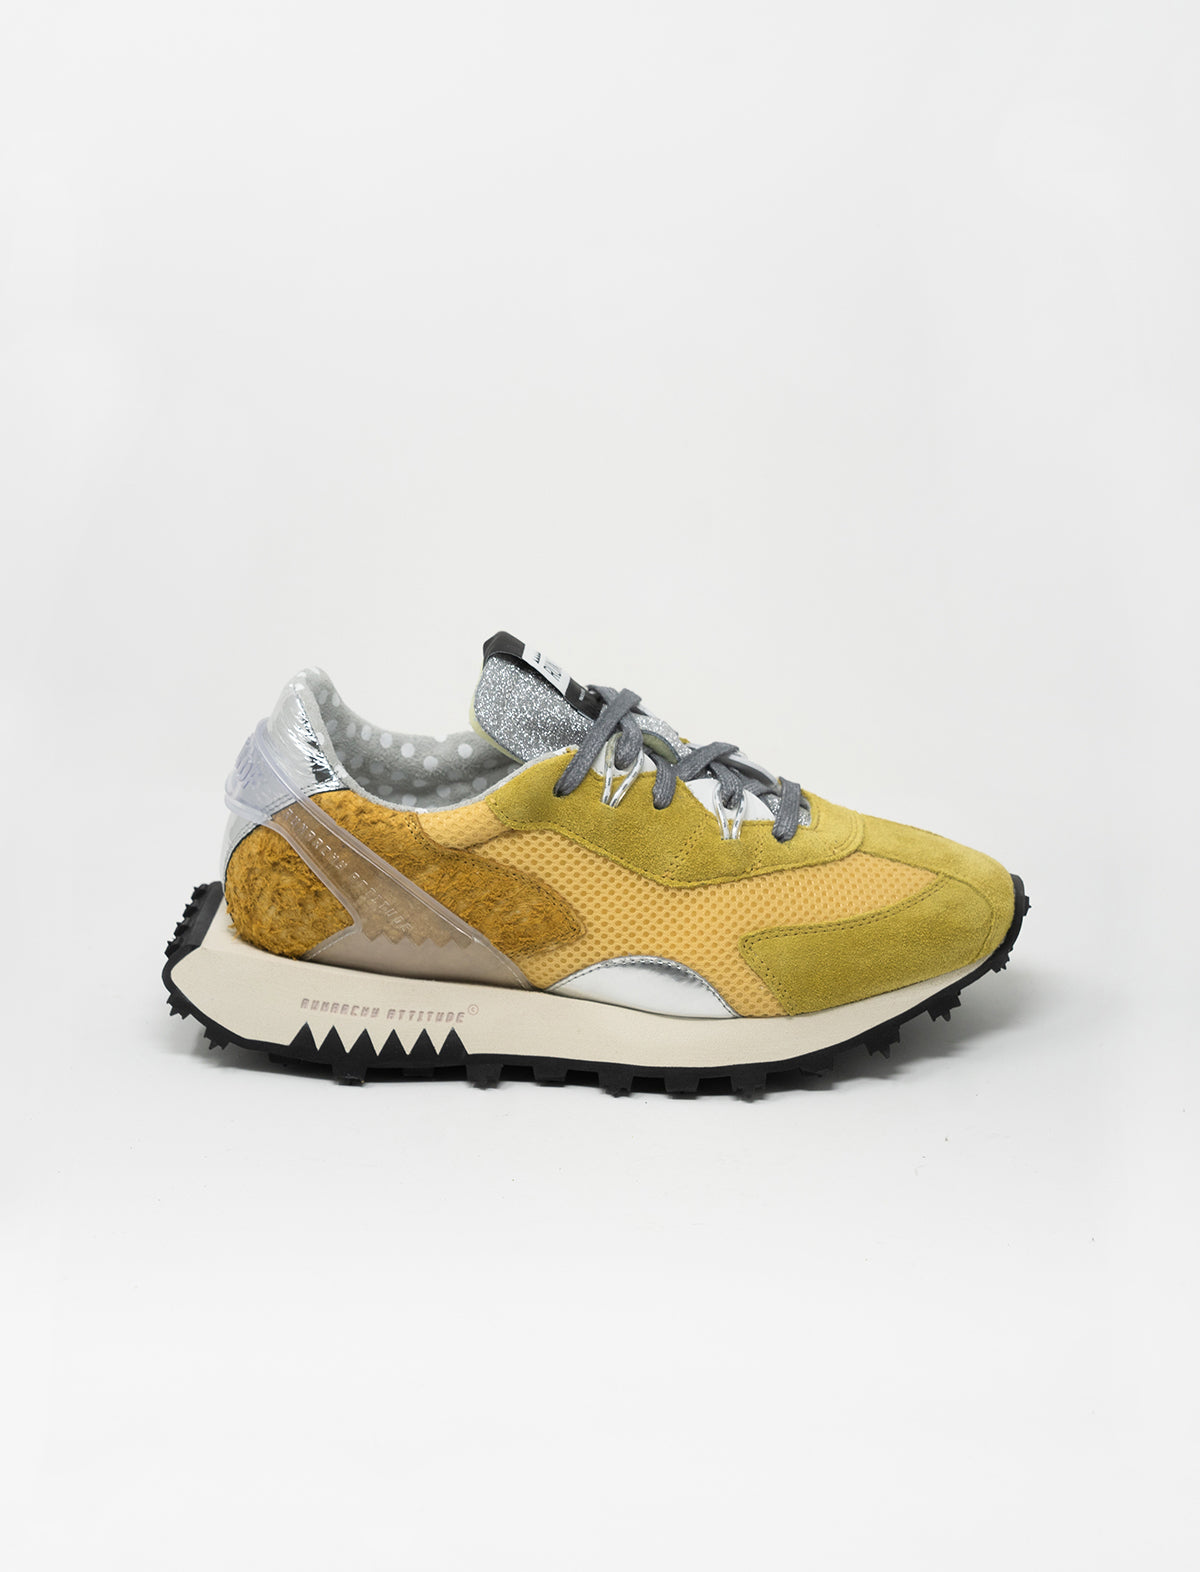 RUN OF Witch Sneakers in Yellow